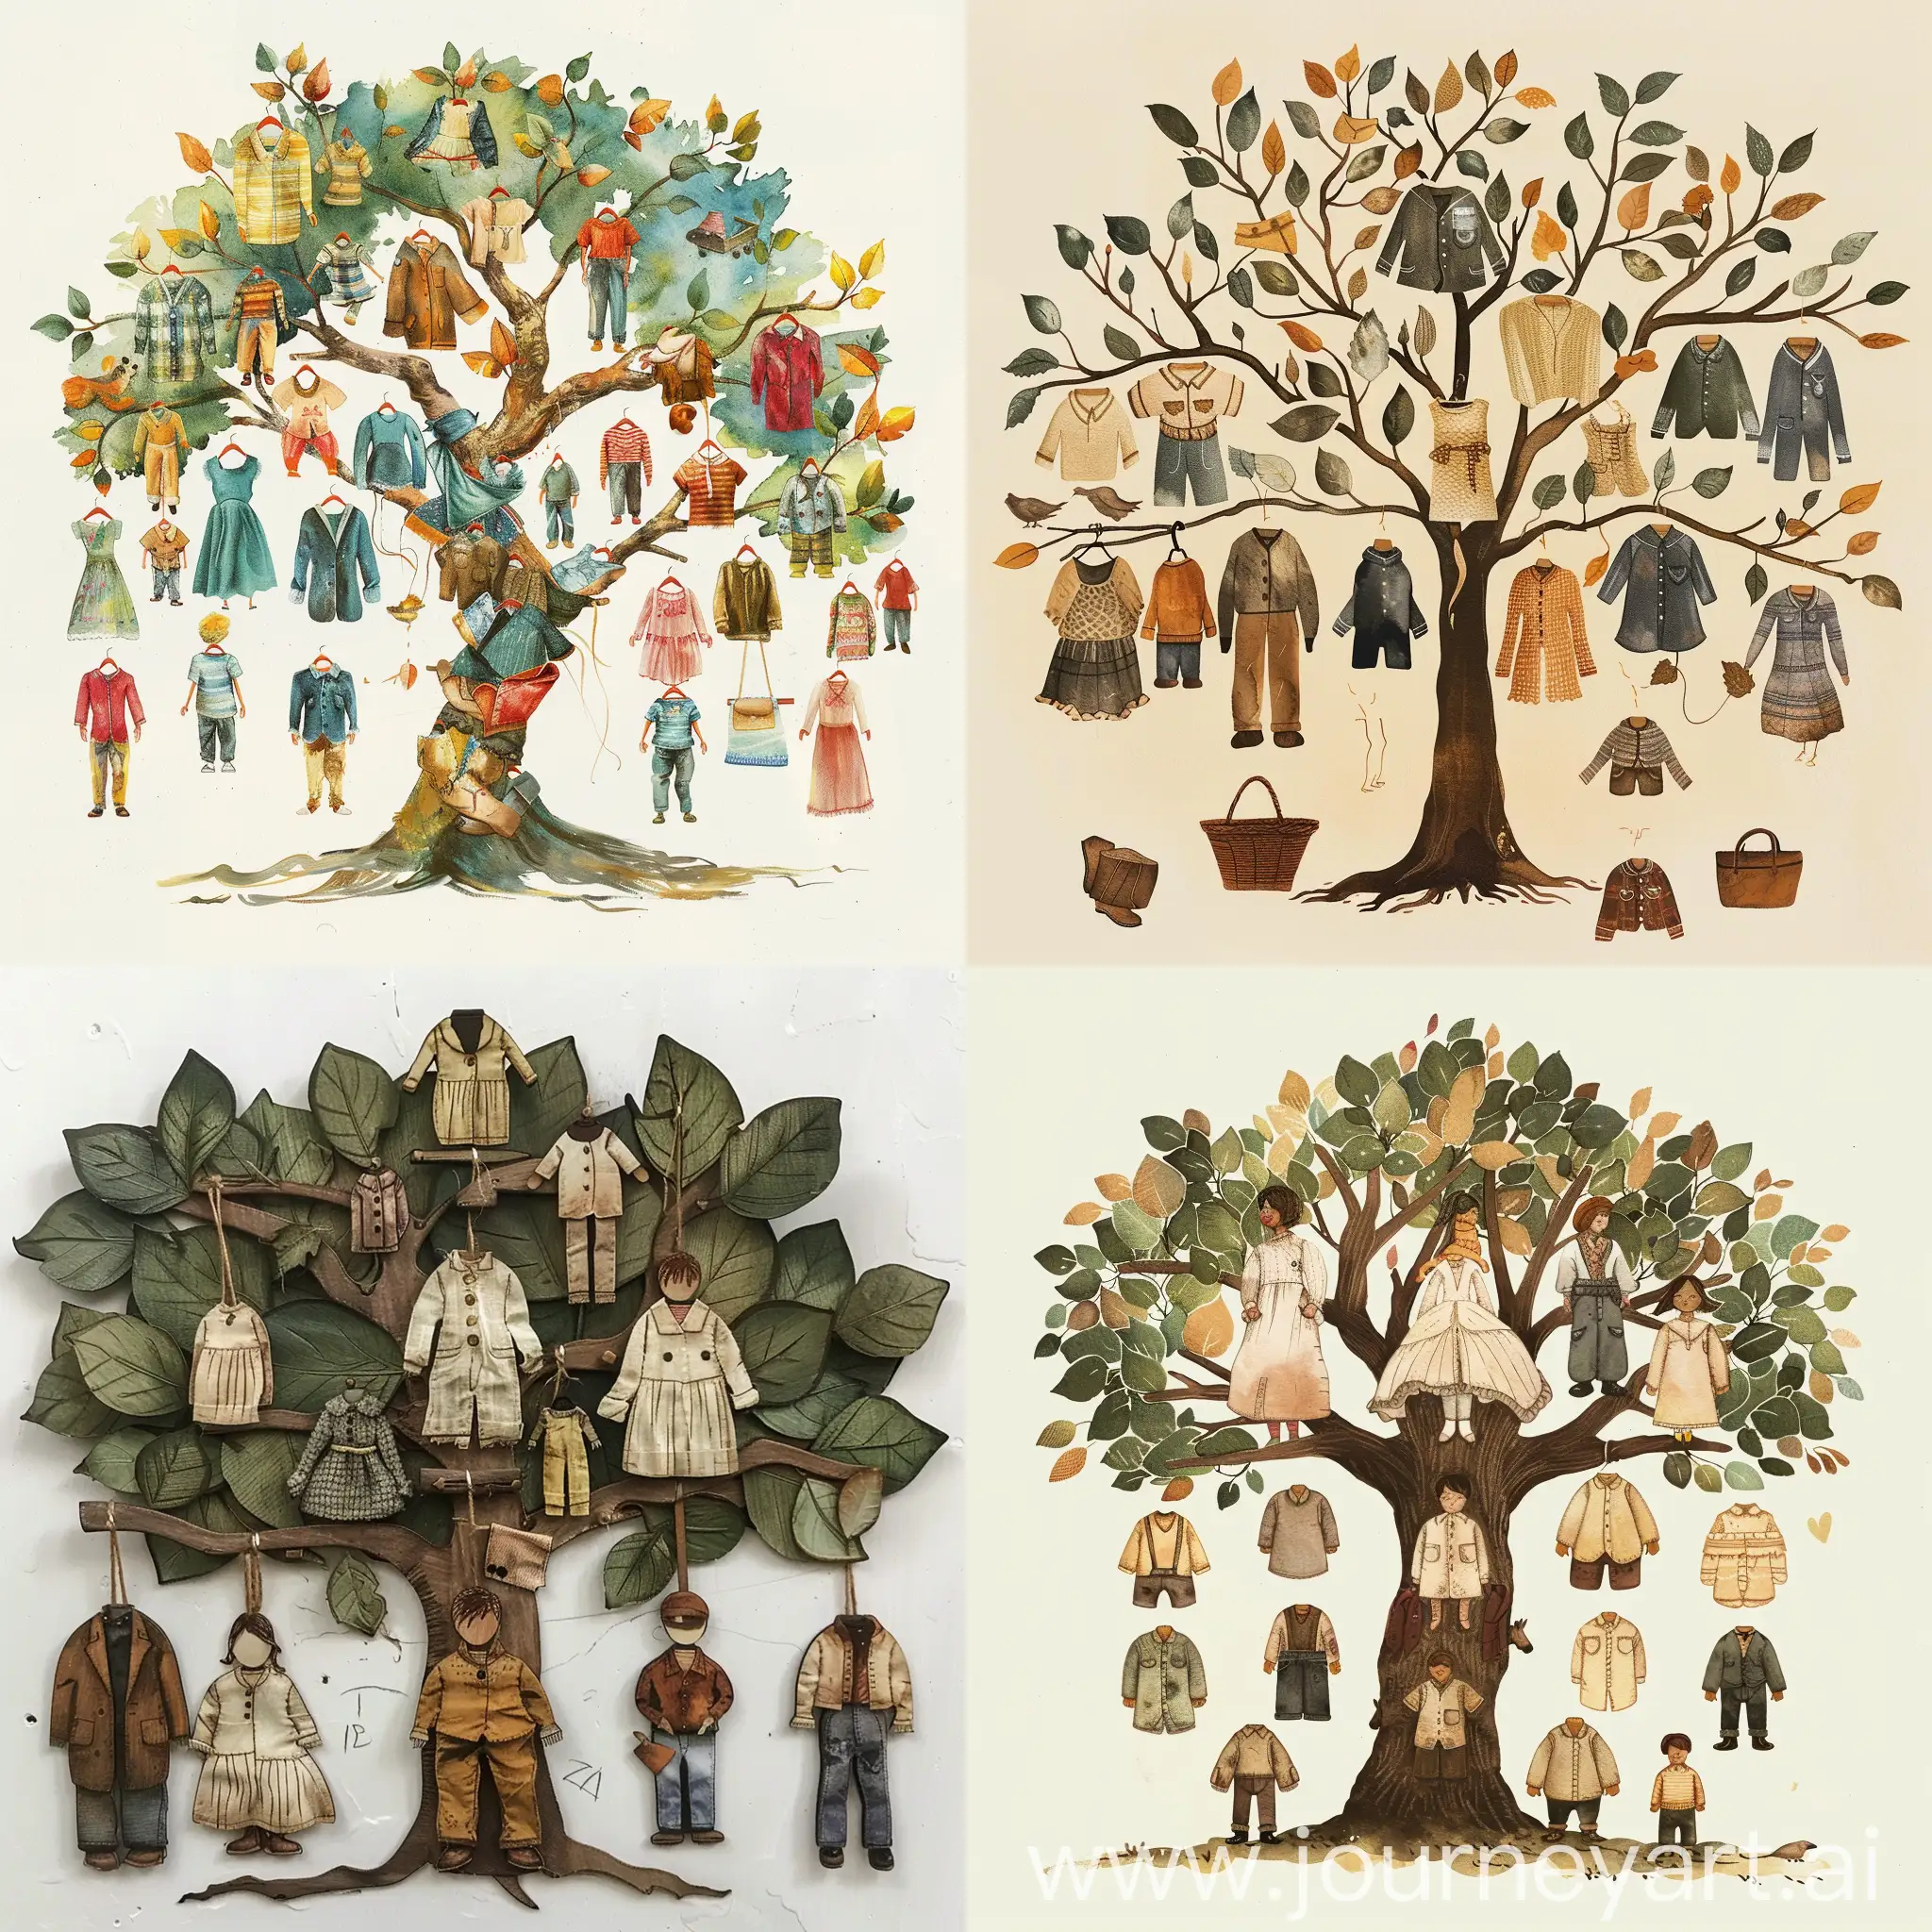 I want a small family tree with worn clothes to teach jobs and family members for A1 adult learners